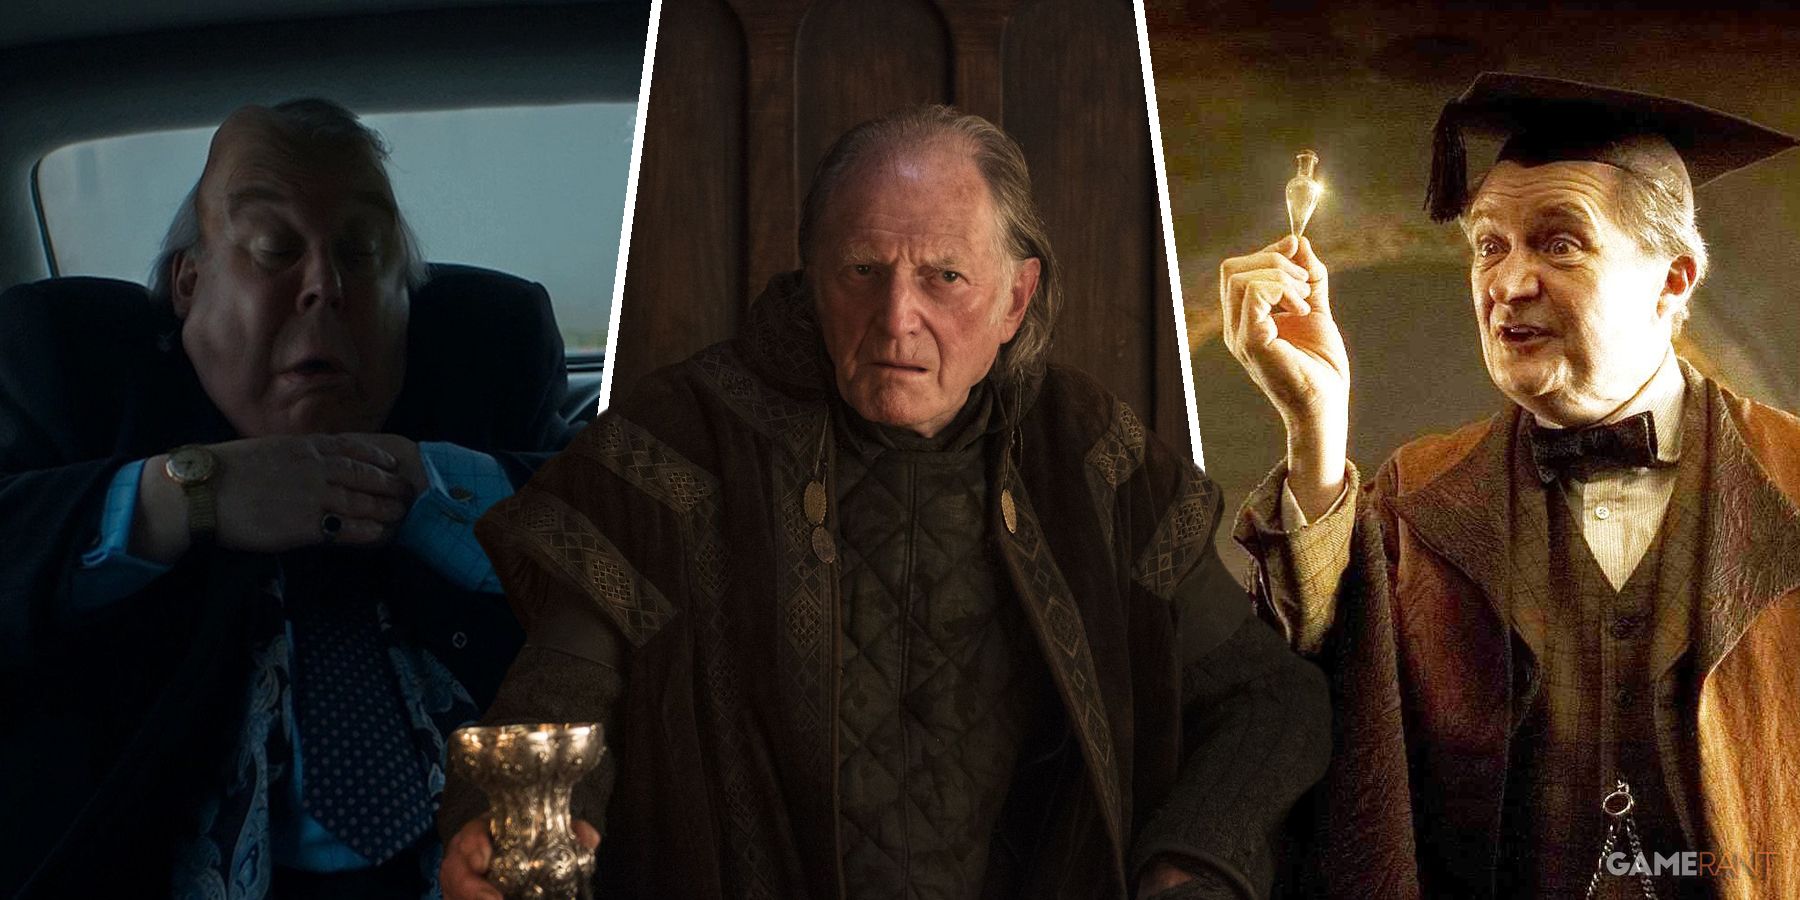 Nicholas Blane, David Bradley, and Jim Broadbent in Doctor Who, Game of Thrones, and Harry Potter